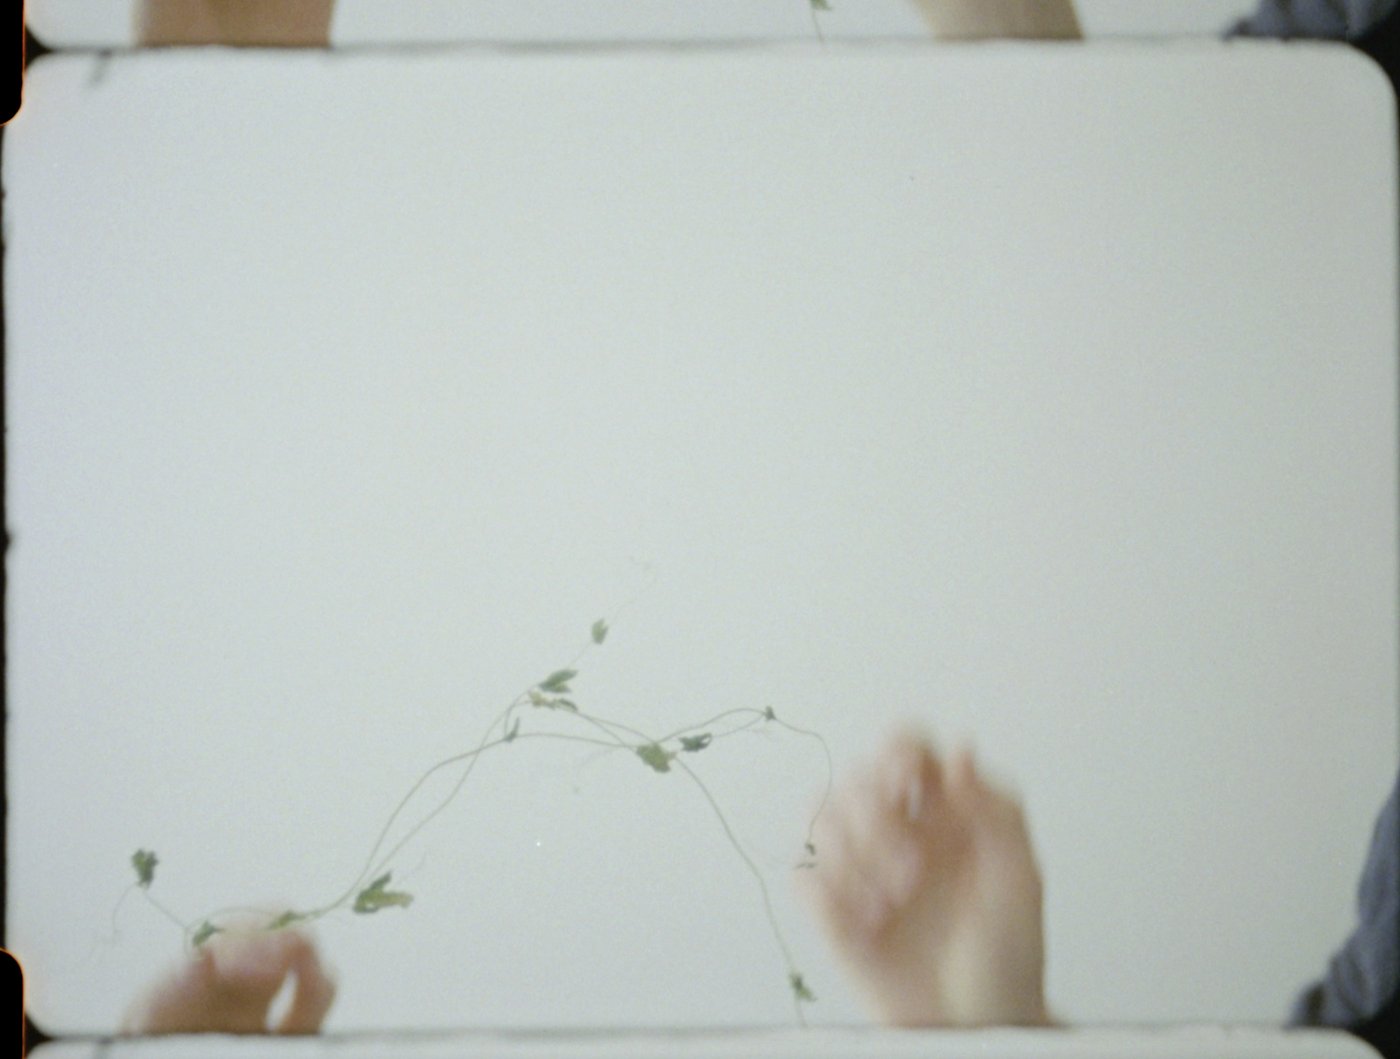 16mm film still, white background, dried plant and two hands arranging it.